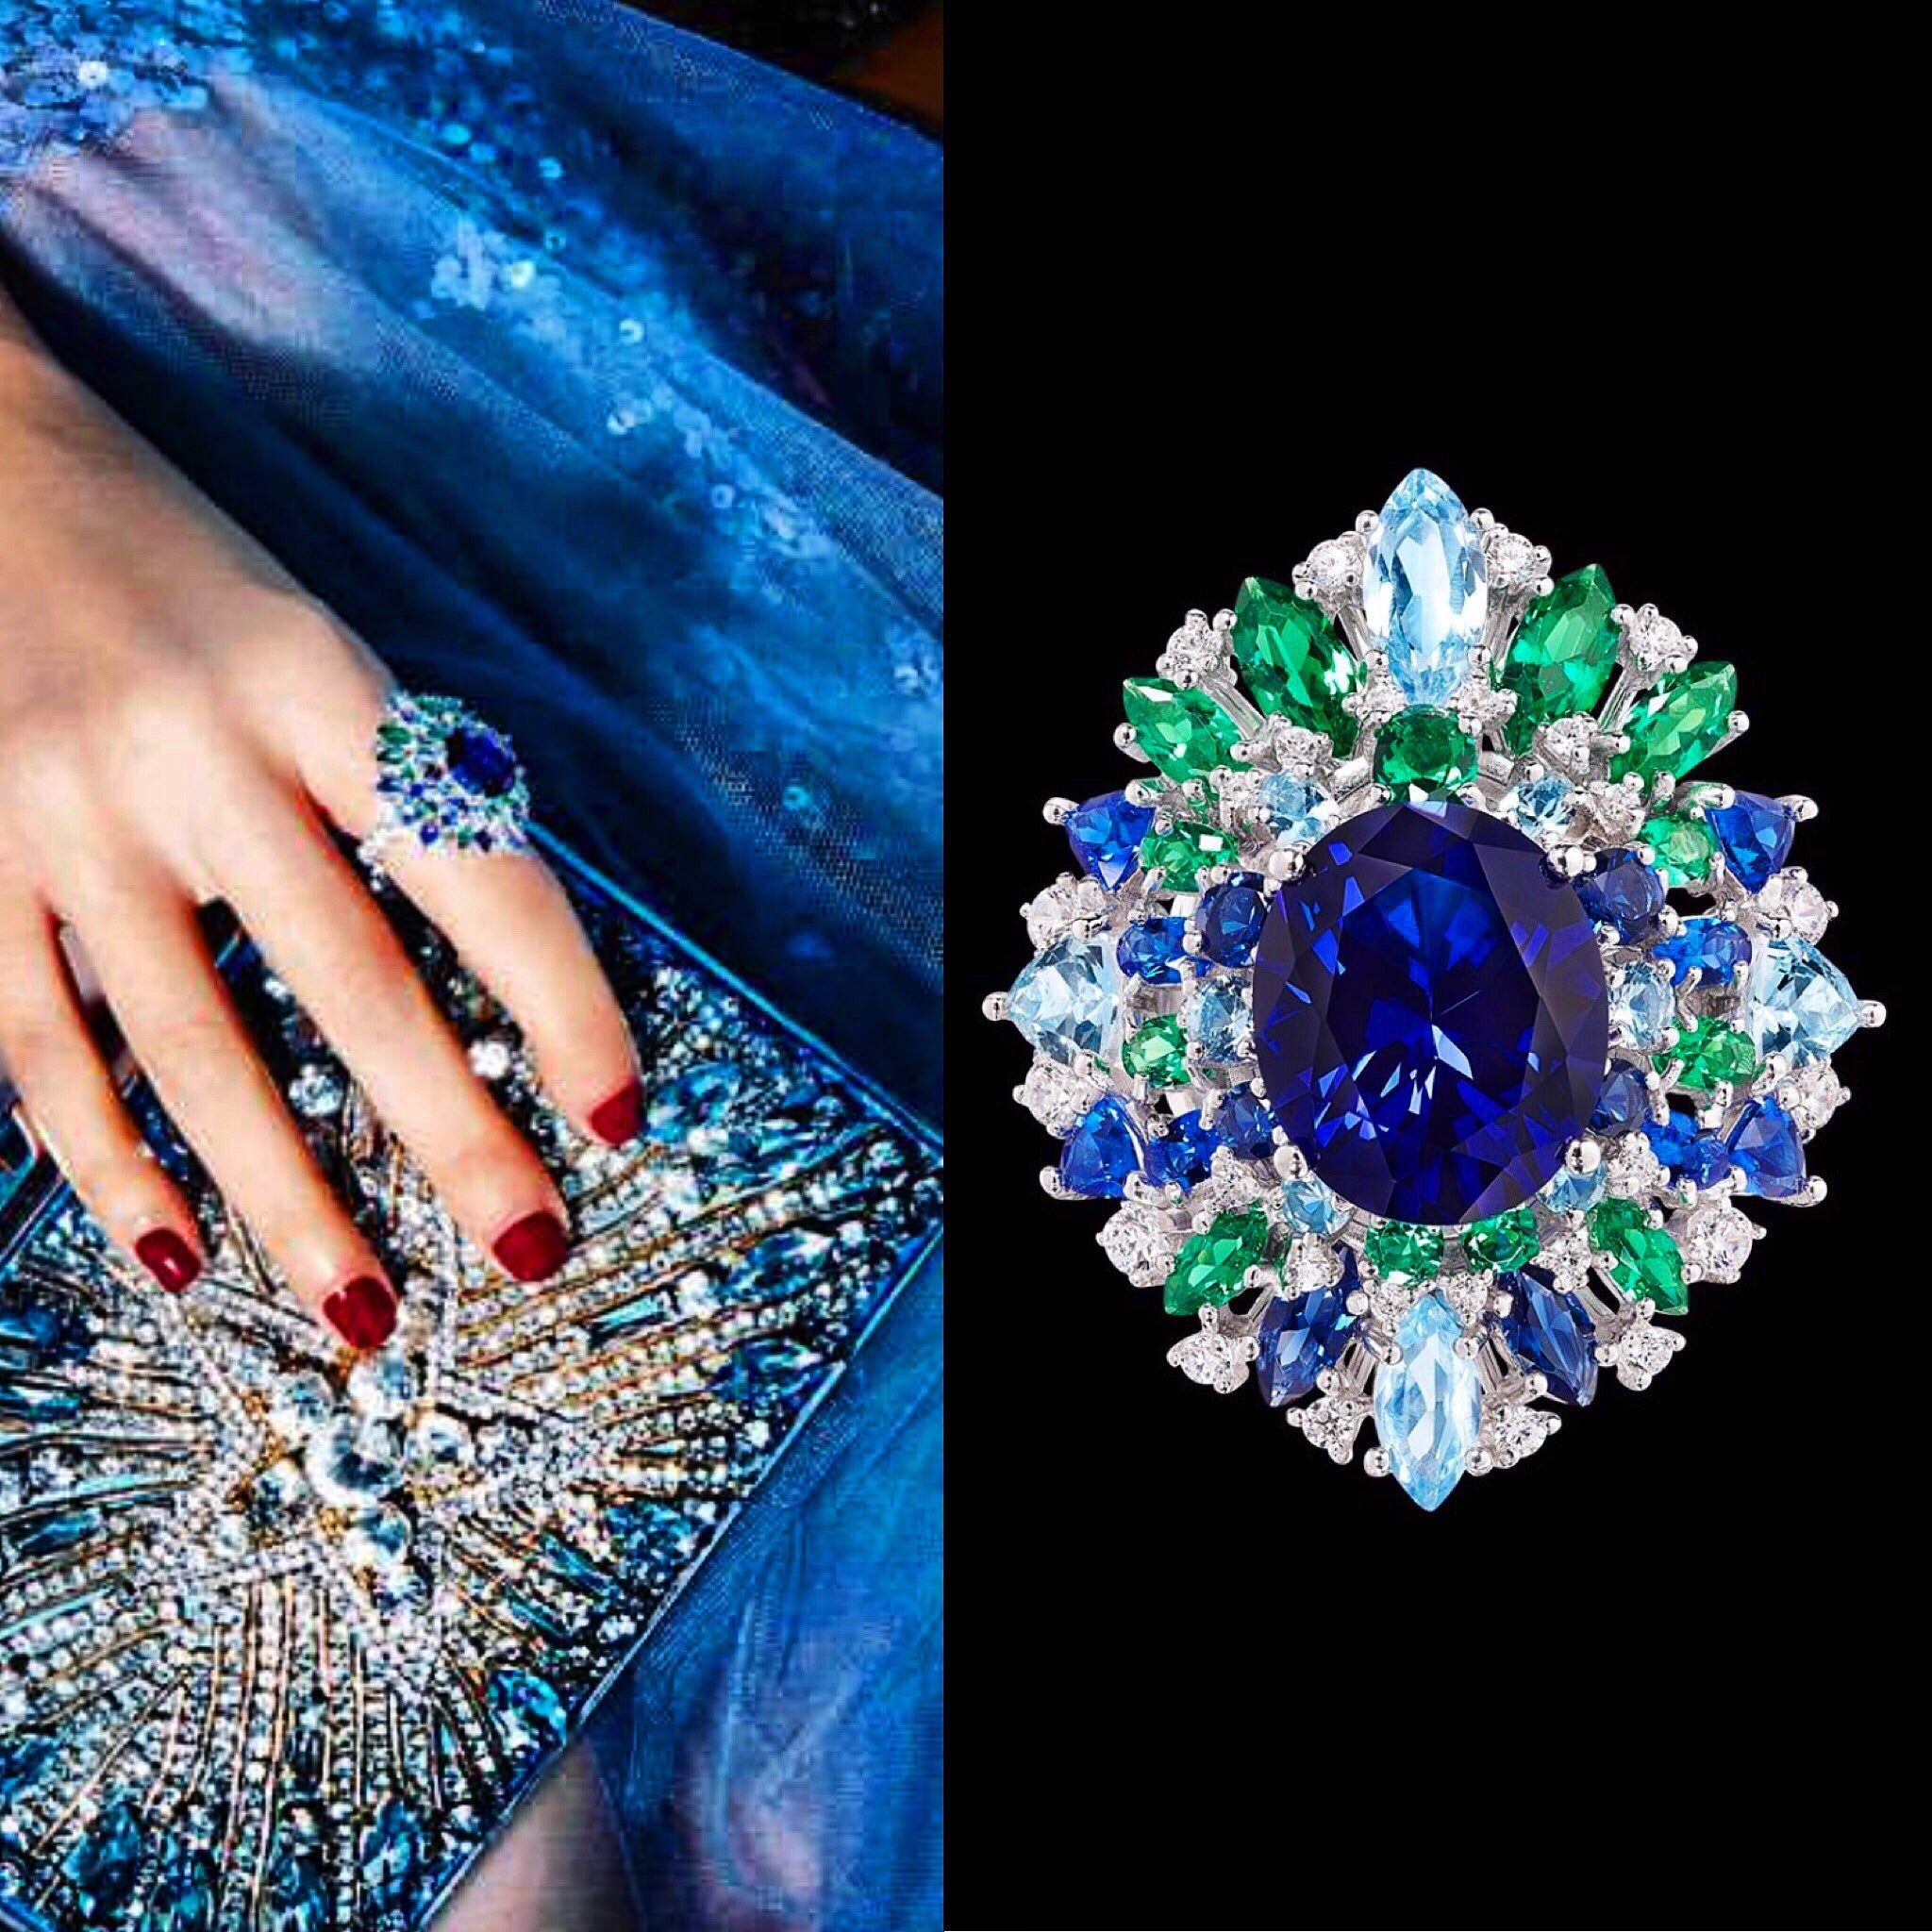 Sapphire Mirage Ring, Ring, Anabela Chan Joaillerie - Fine jewelry with laboratory grown and created gemstones hand-crafted in the United Kingdom. Anabela Chan Joaillerie is the first fine jewellery brand in the world to champion laboratory-grown and created gemstones with high jewellery design, artisanal craftsmanship and a focus on ethical and sustainable innovations.